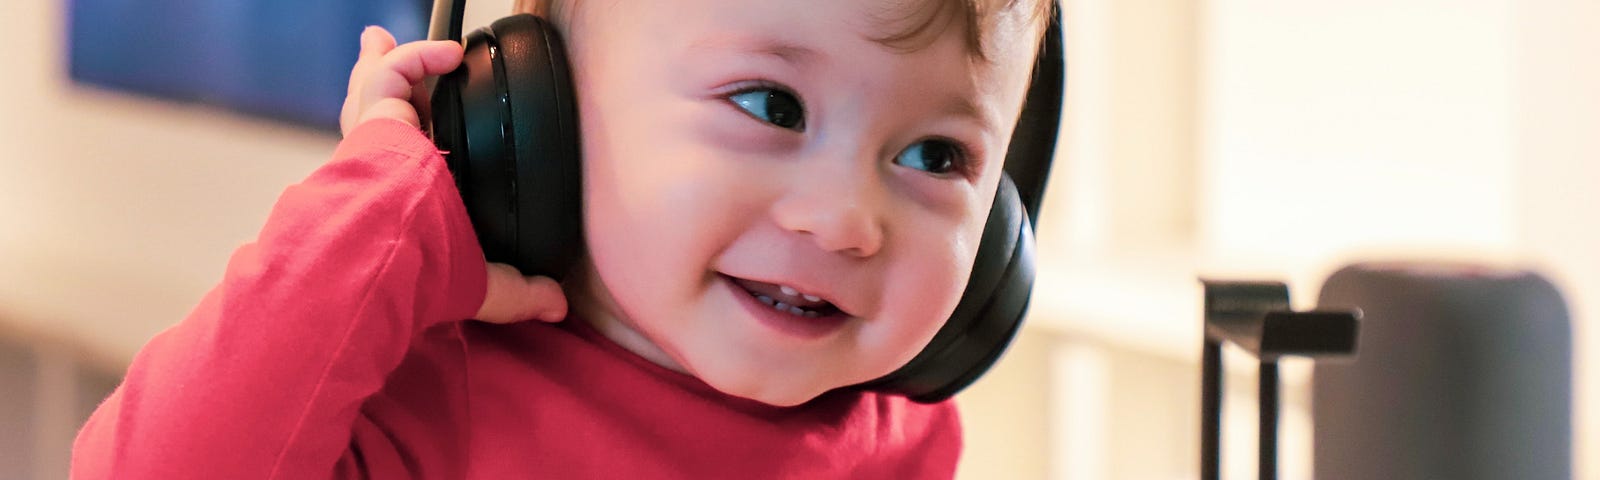 A baby puts a headset on and smiles.